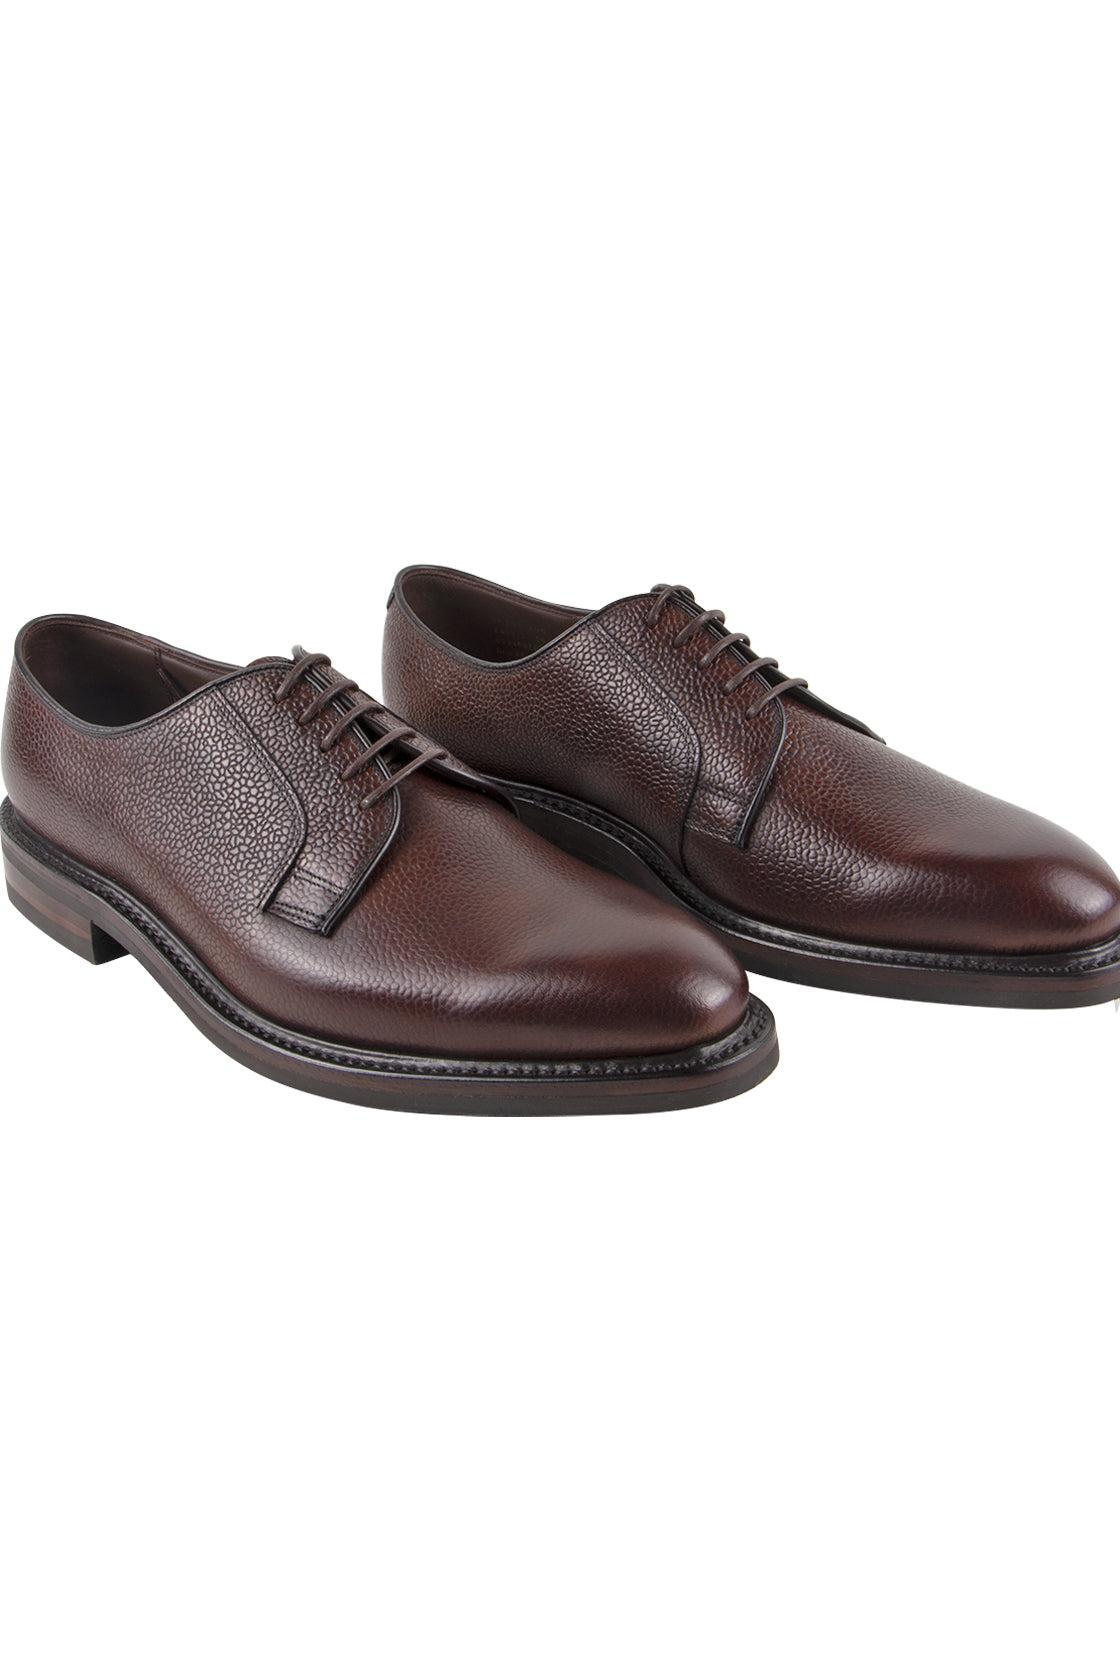 Loake Troon Burnished Calf Leather Shoe Rosewood